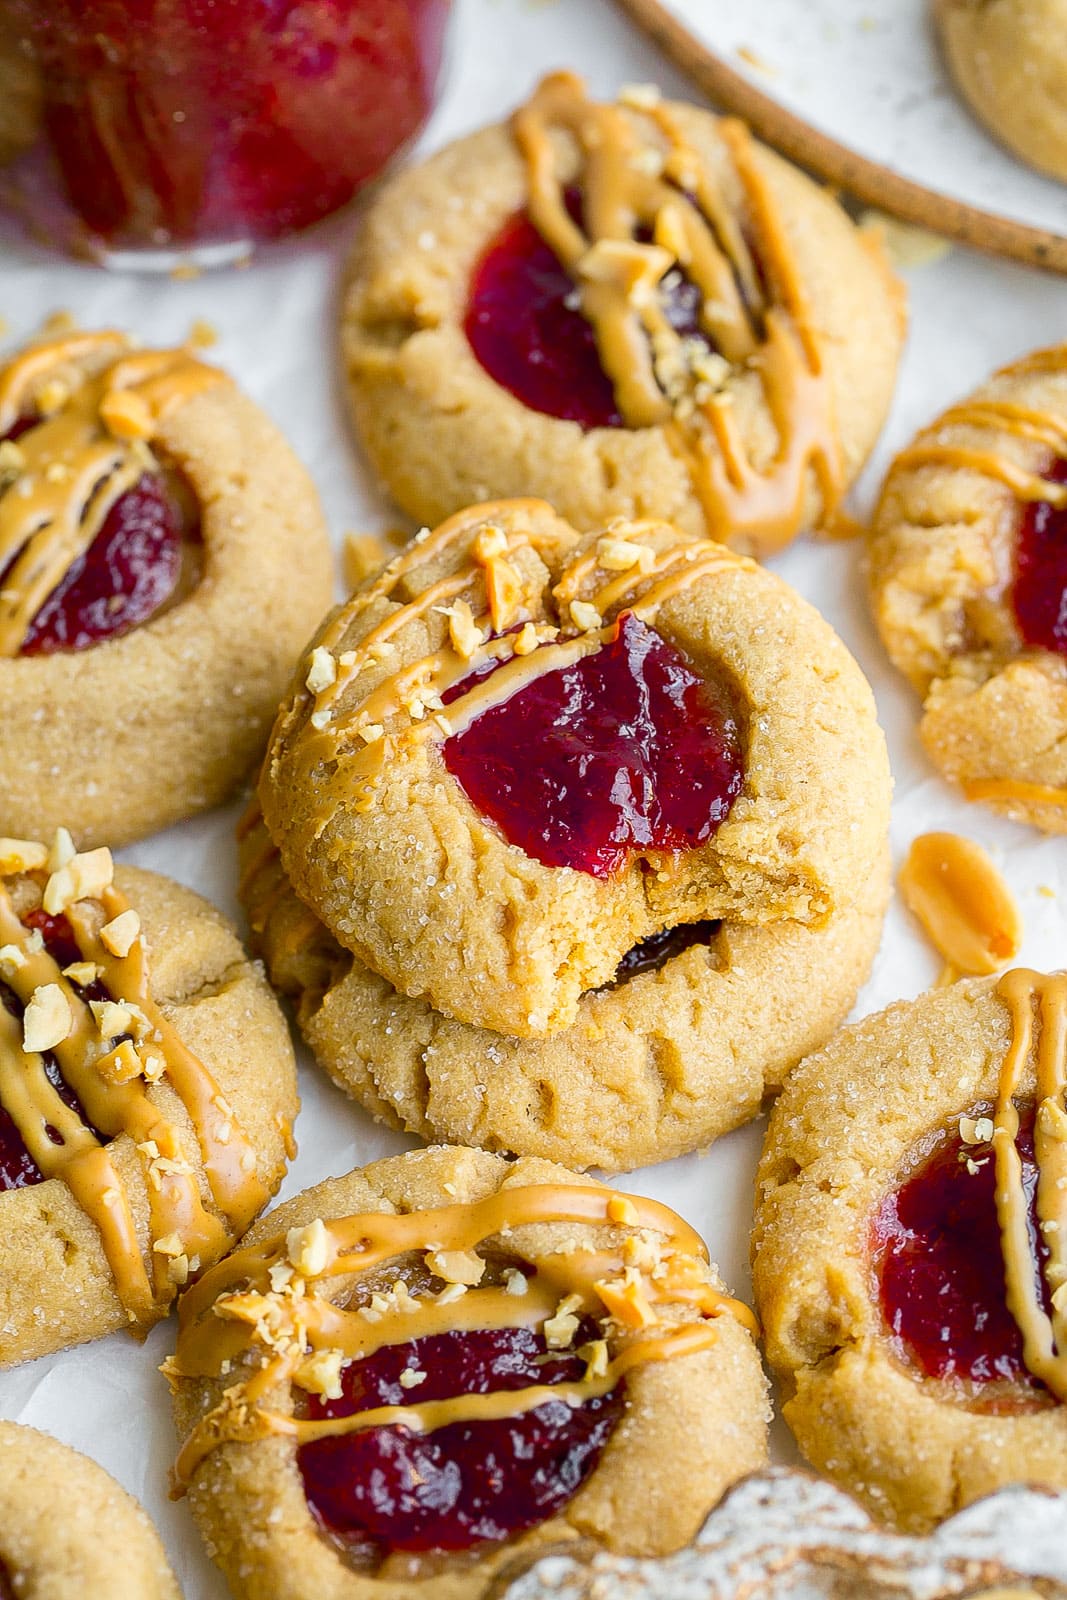 Peanut Butter and Jelly Cookies.